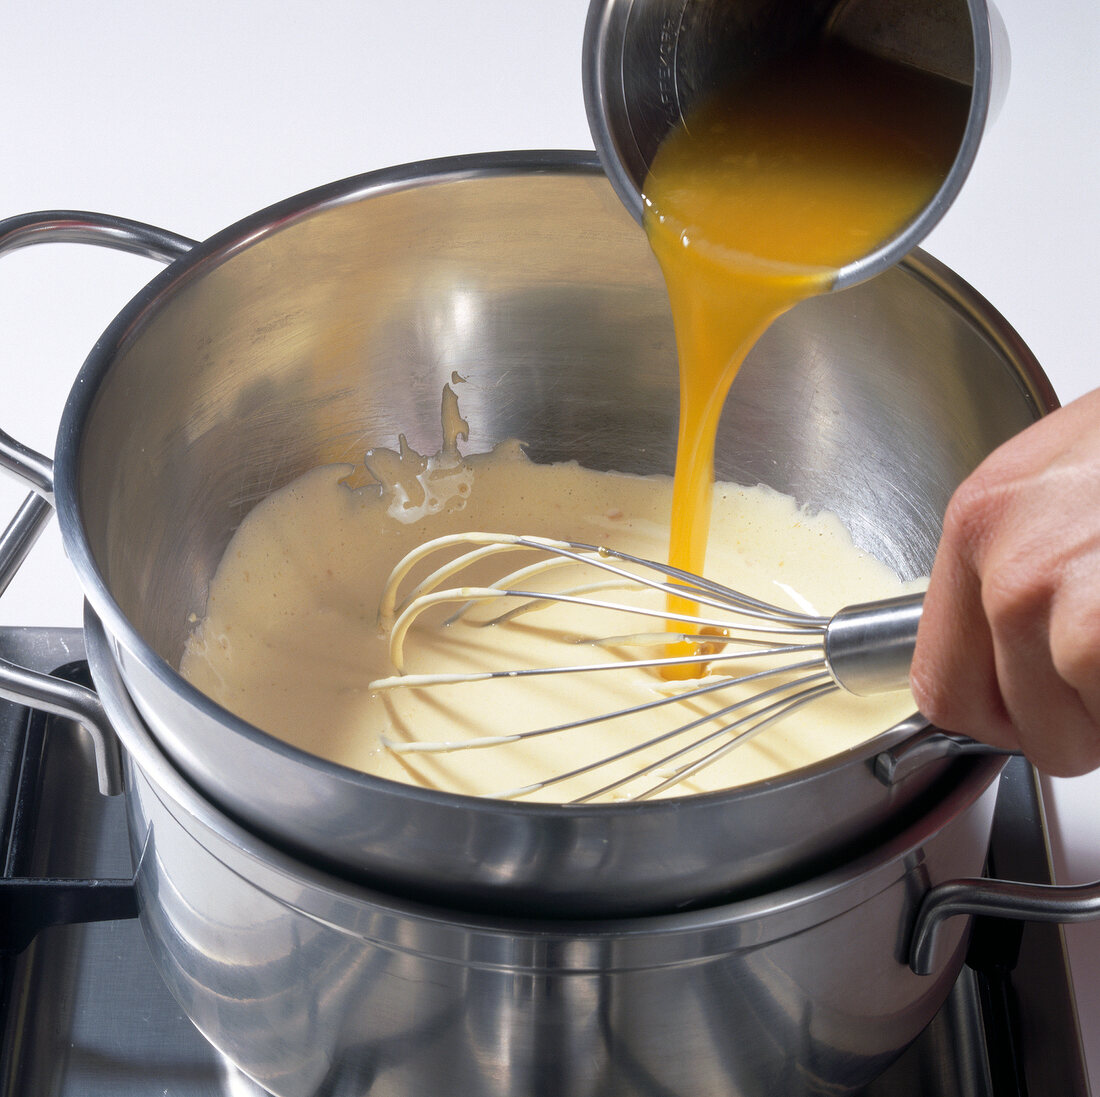 Pouring passion fruit juice into egg and whisking